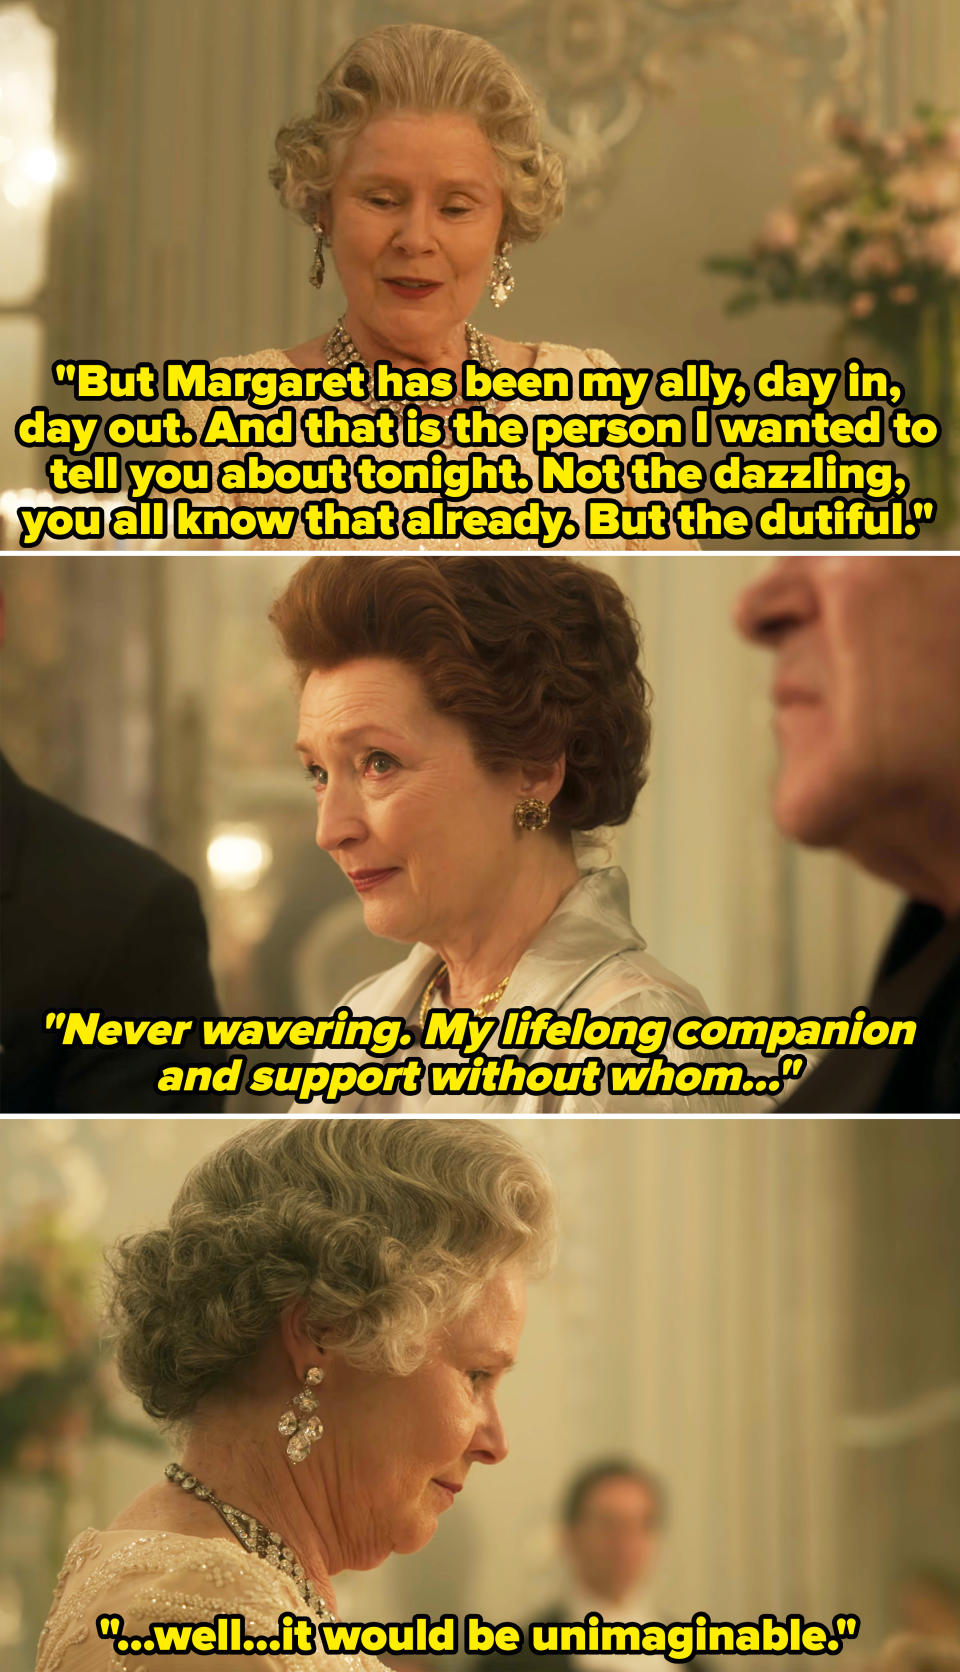 Queen Elizabeth at an intimate gathering in the show, saying her sister has been her ally, "day in, day out" — "never wavering, my lifelong companion and support without whom, well, it would be imaginable"